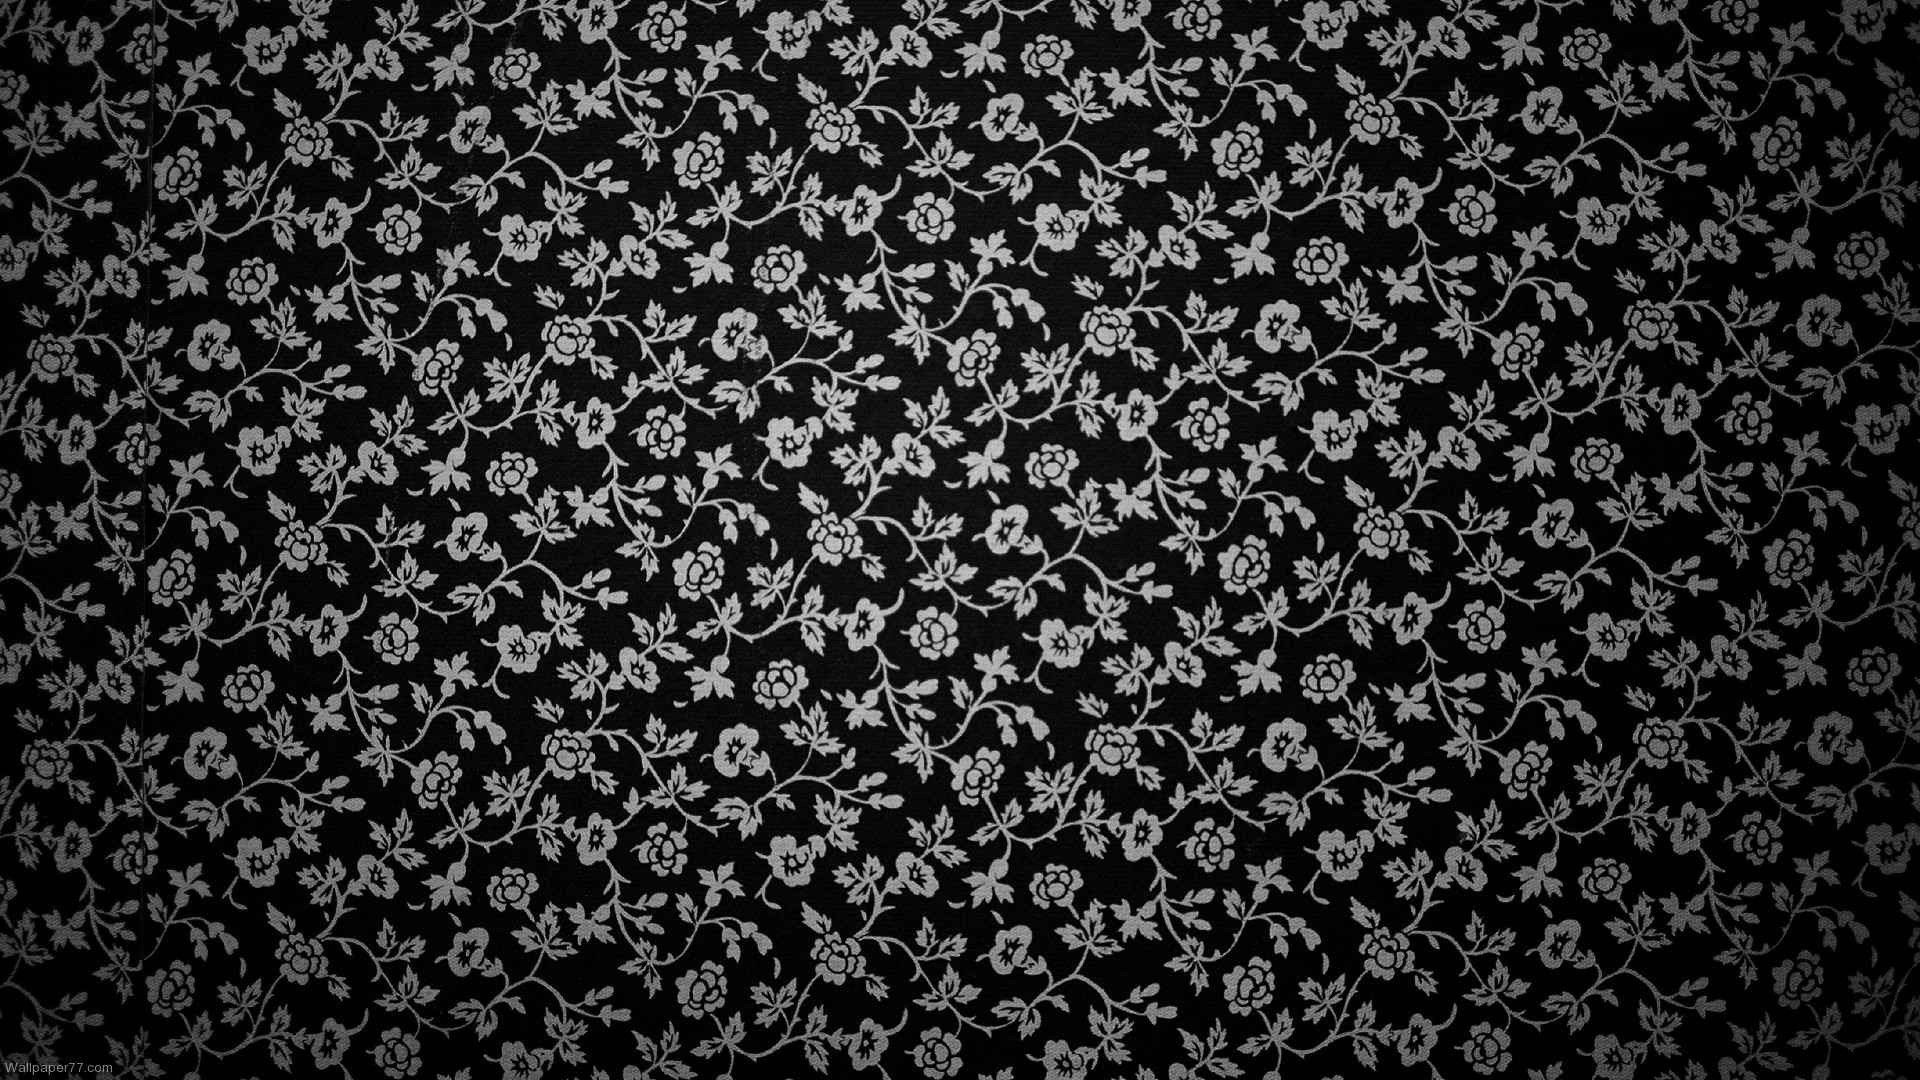 Pattern White Roses background patterns pattern wallpapers 1920x1080 1920x1080